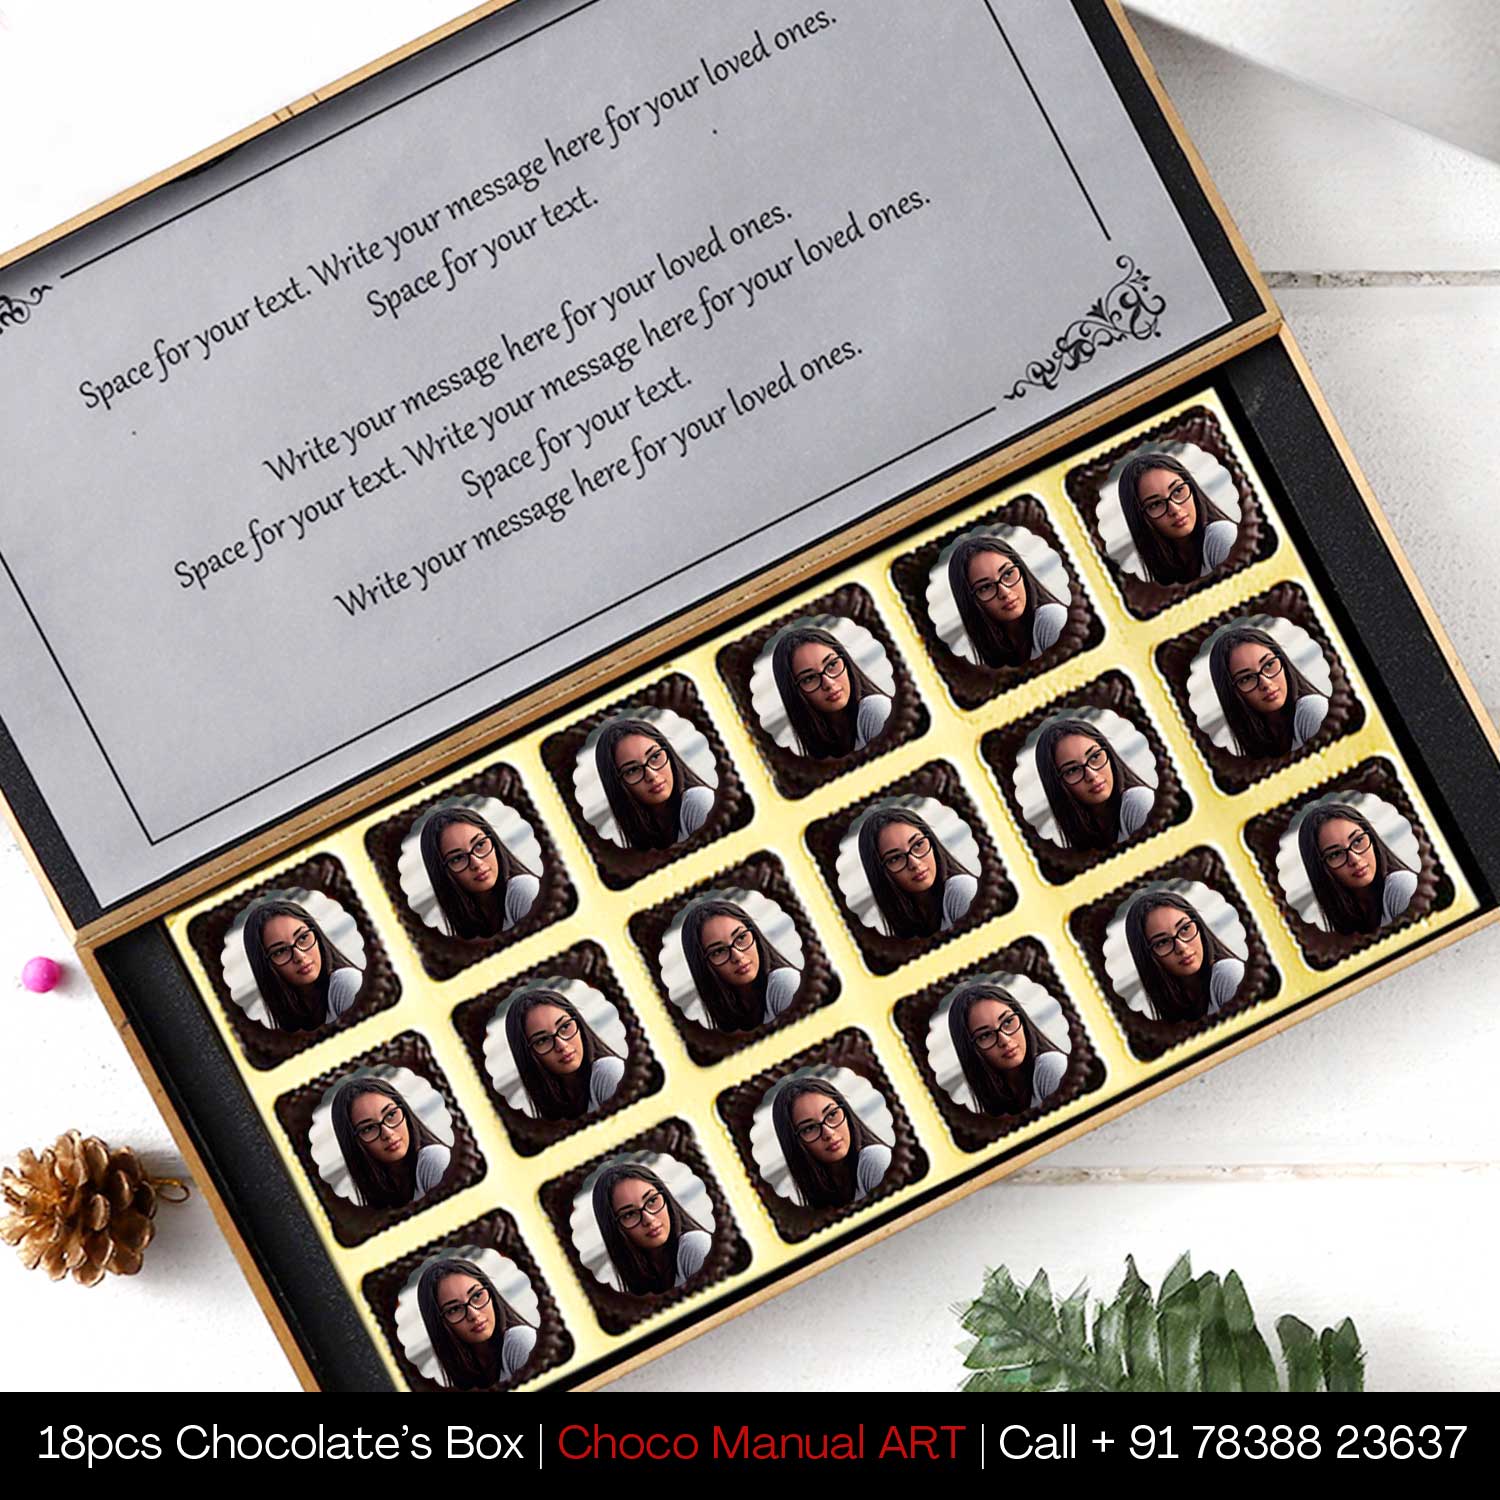  personalised chocolate corporate gifts personalised chocolates customized sweets personalised chocolate hamper personalised chocolate message custom chocolate box personalised chocolate gifts for him